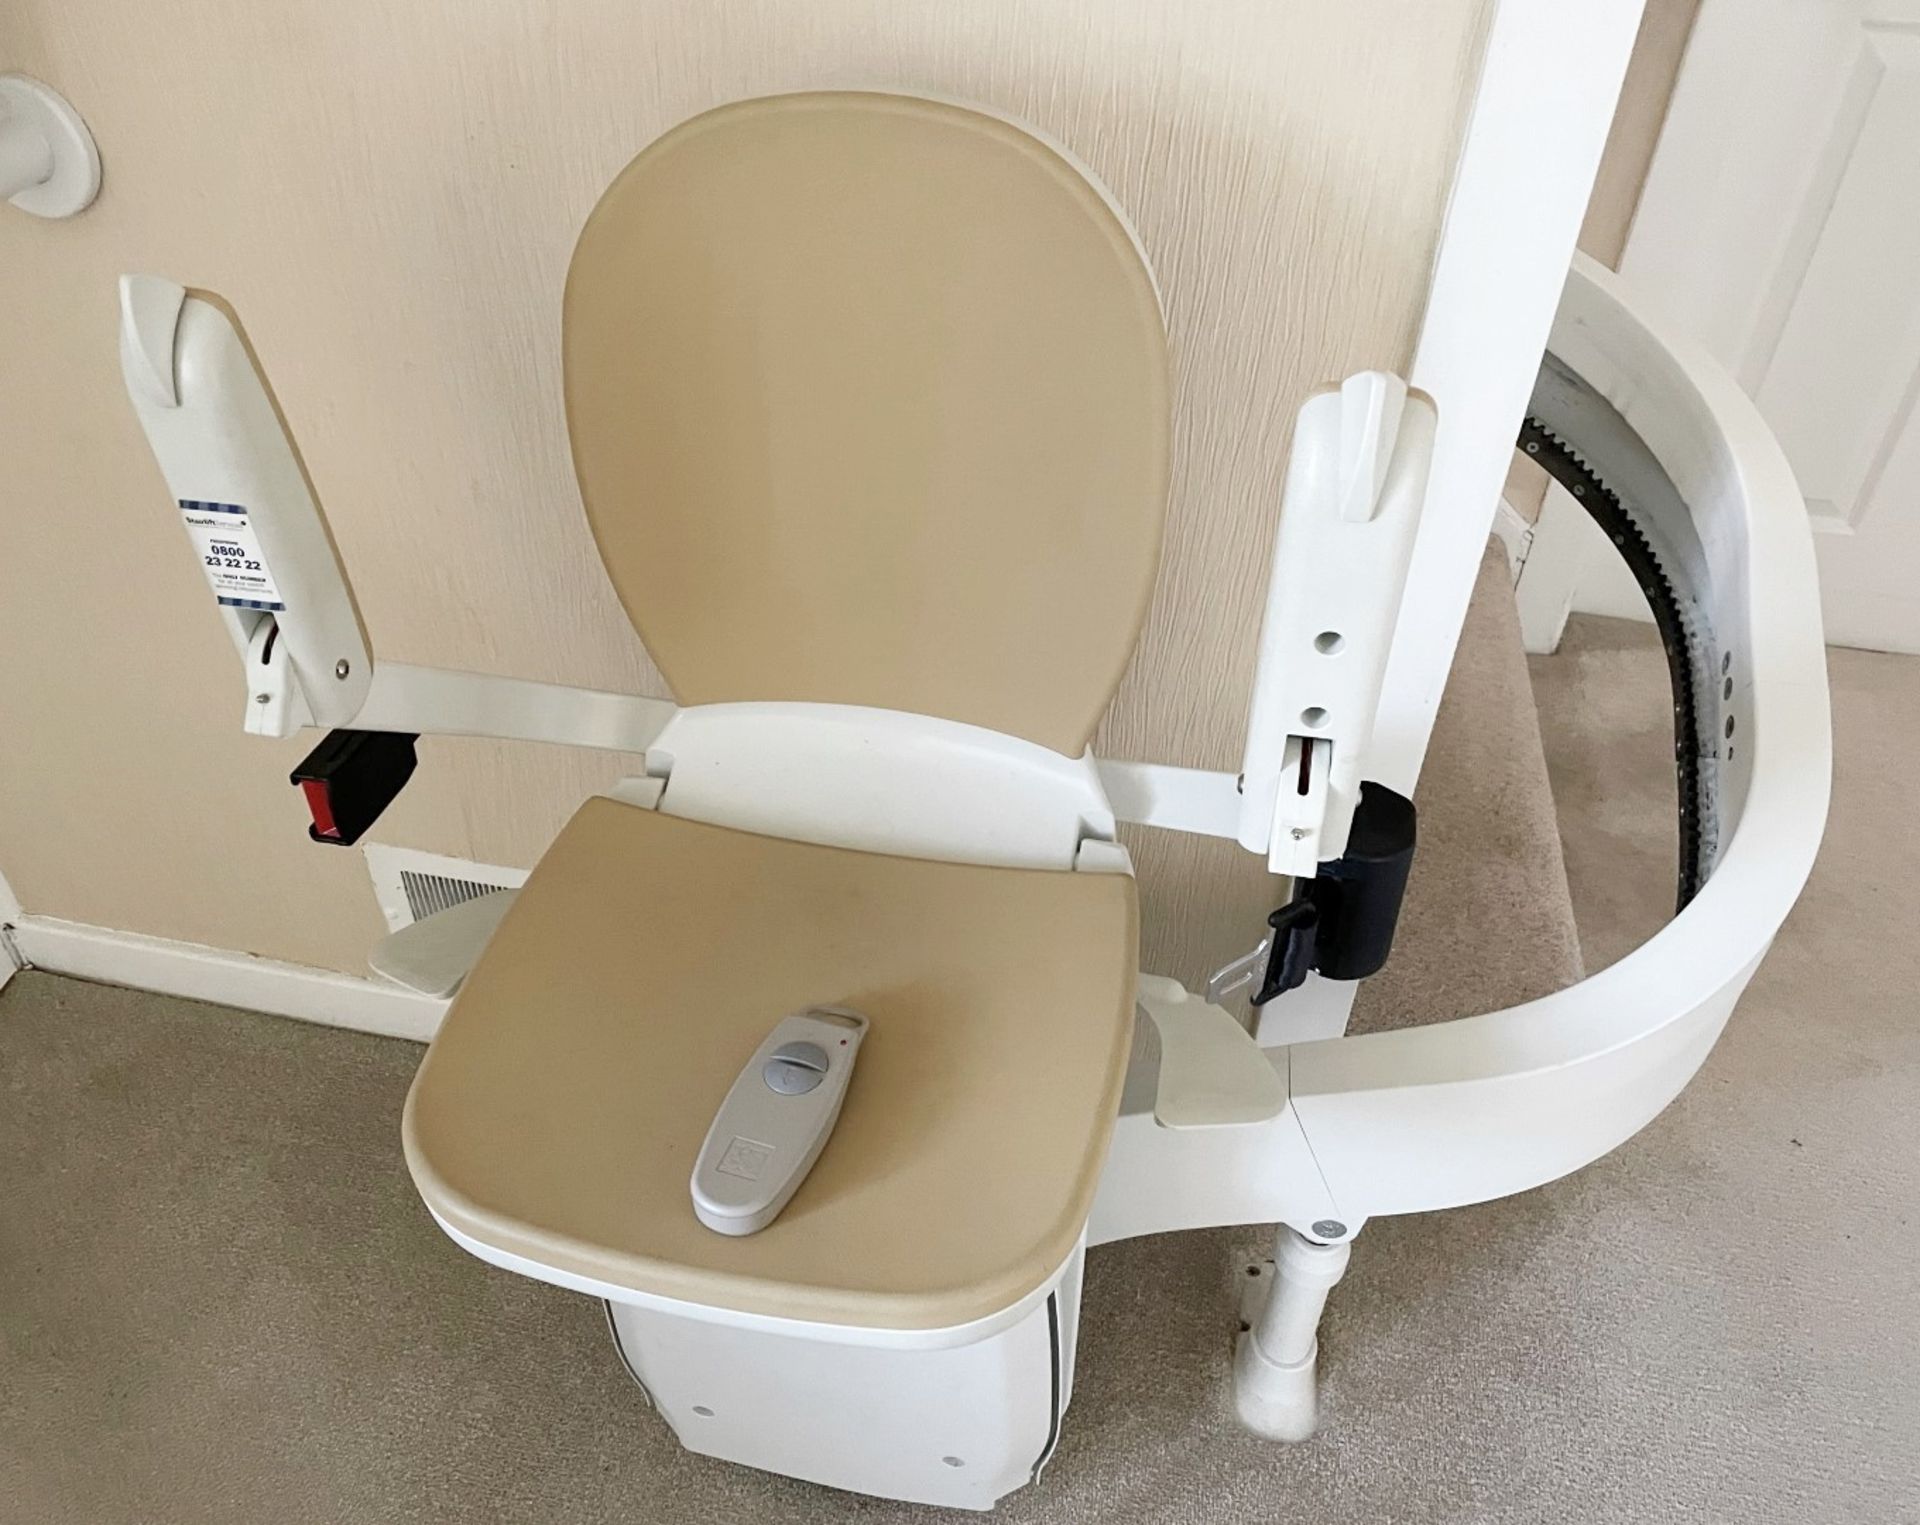 1 x  Acorn 180 Curved Stairlift And Track - Includes 2 x Remote Controllers - From An Exclusive